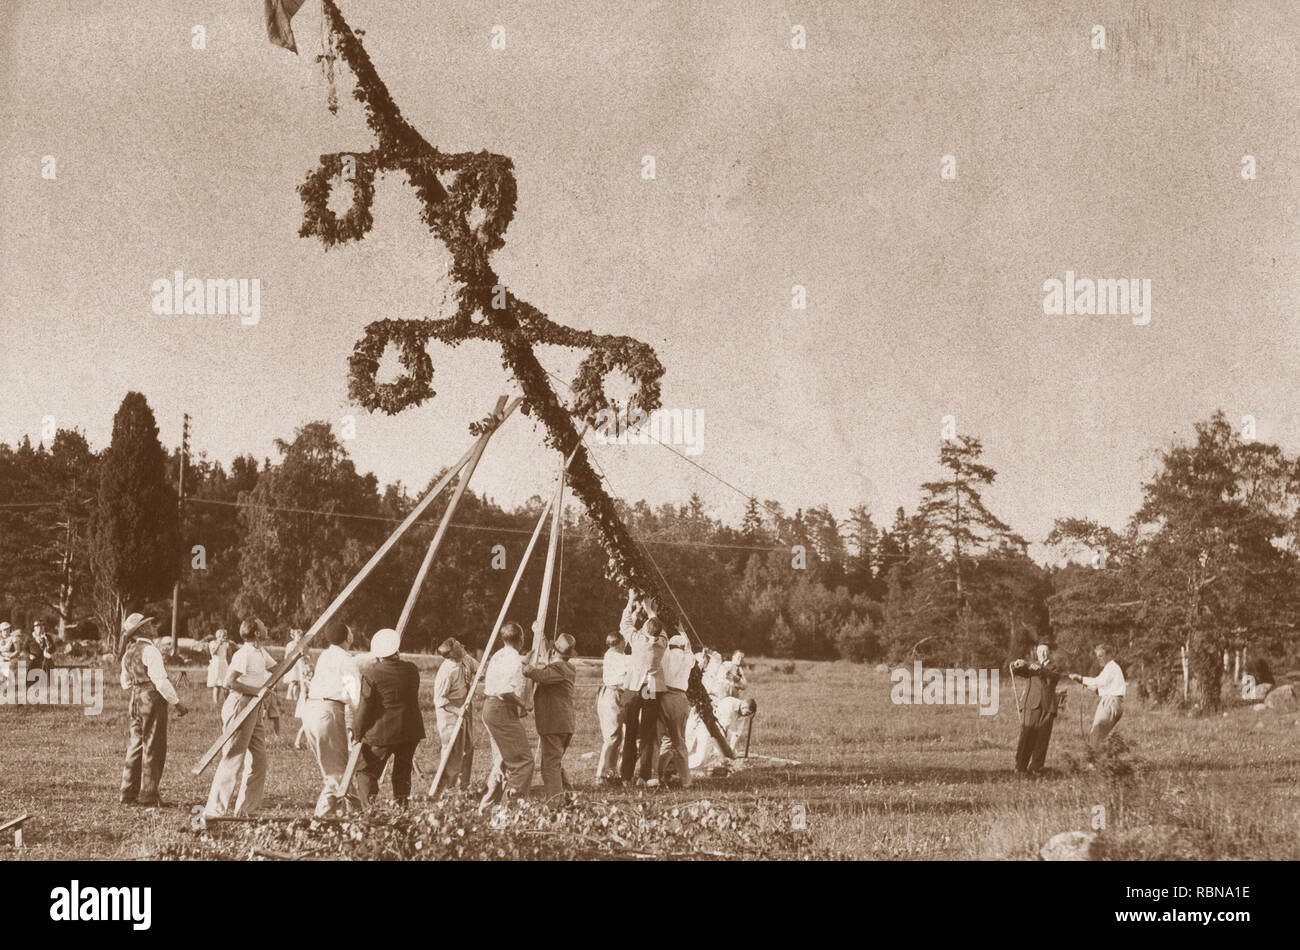 Midsummer tradition in the 1930s. As a part of the festivities a Maypole is risen and here a group of people rises the pole before beginning to dance around it. Sweden 1930s. Stock Photo